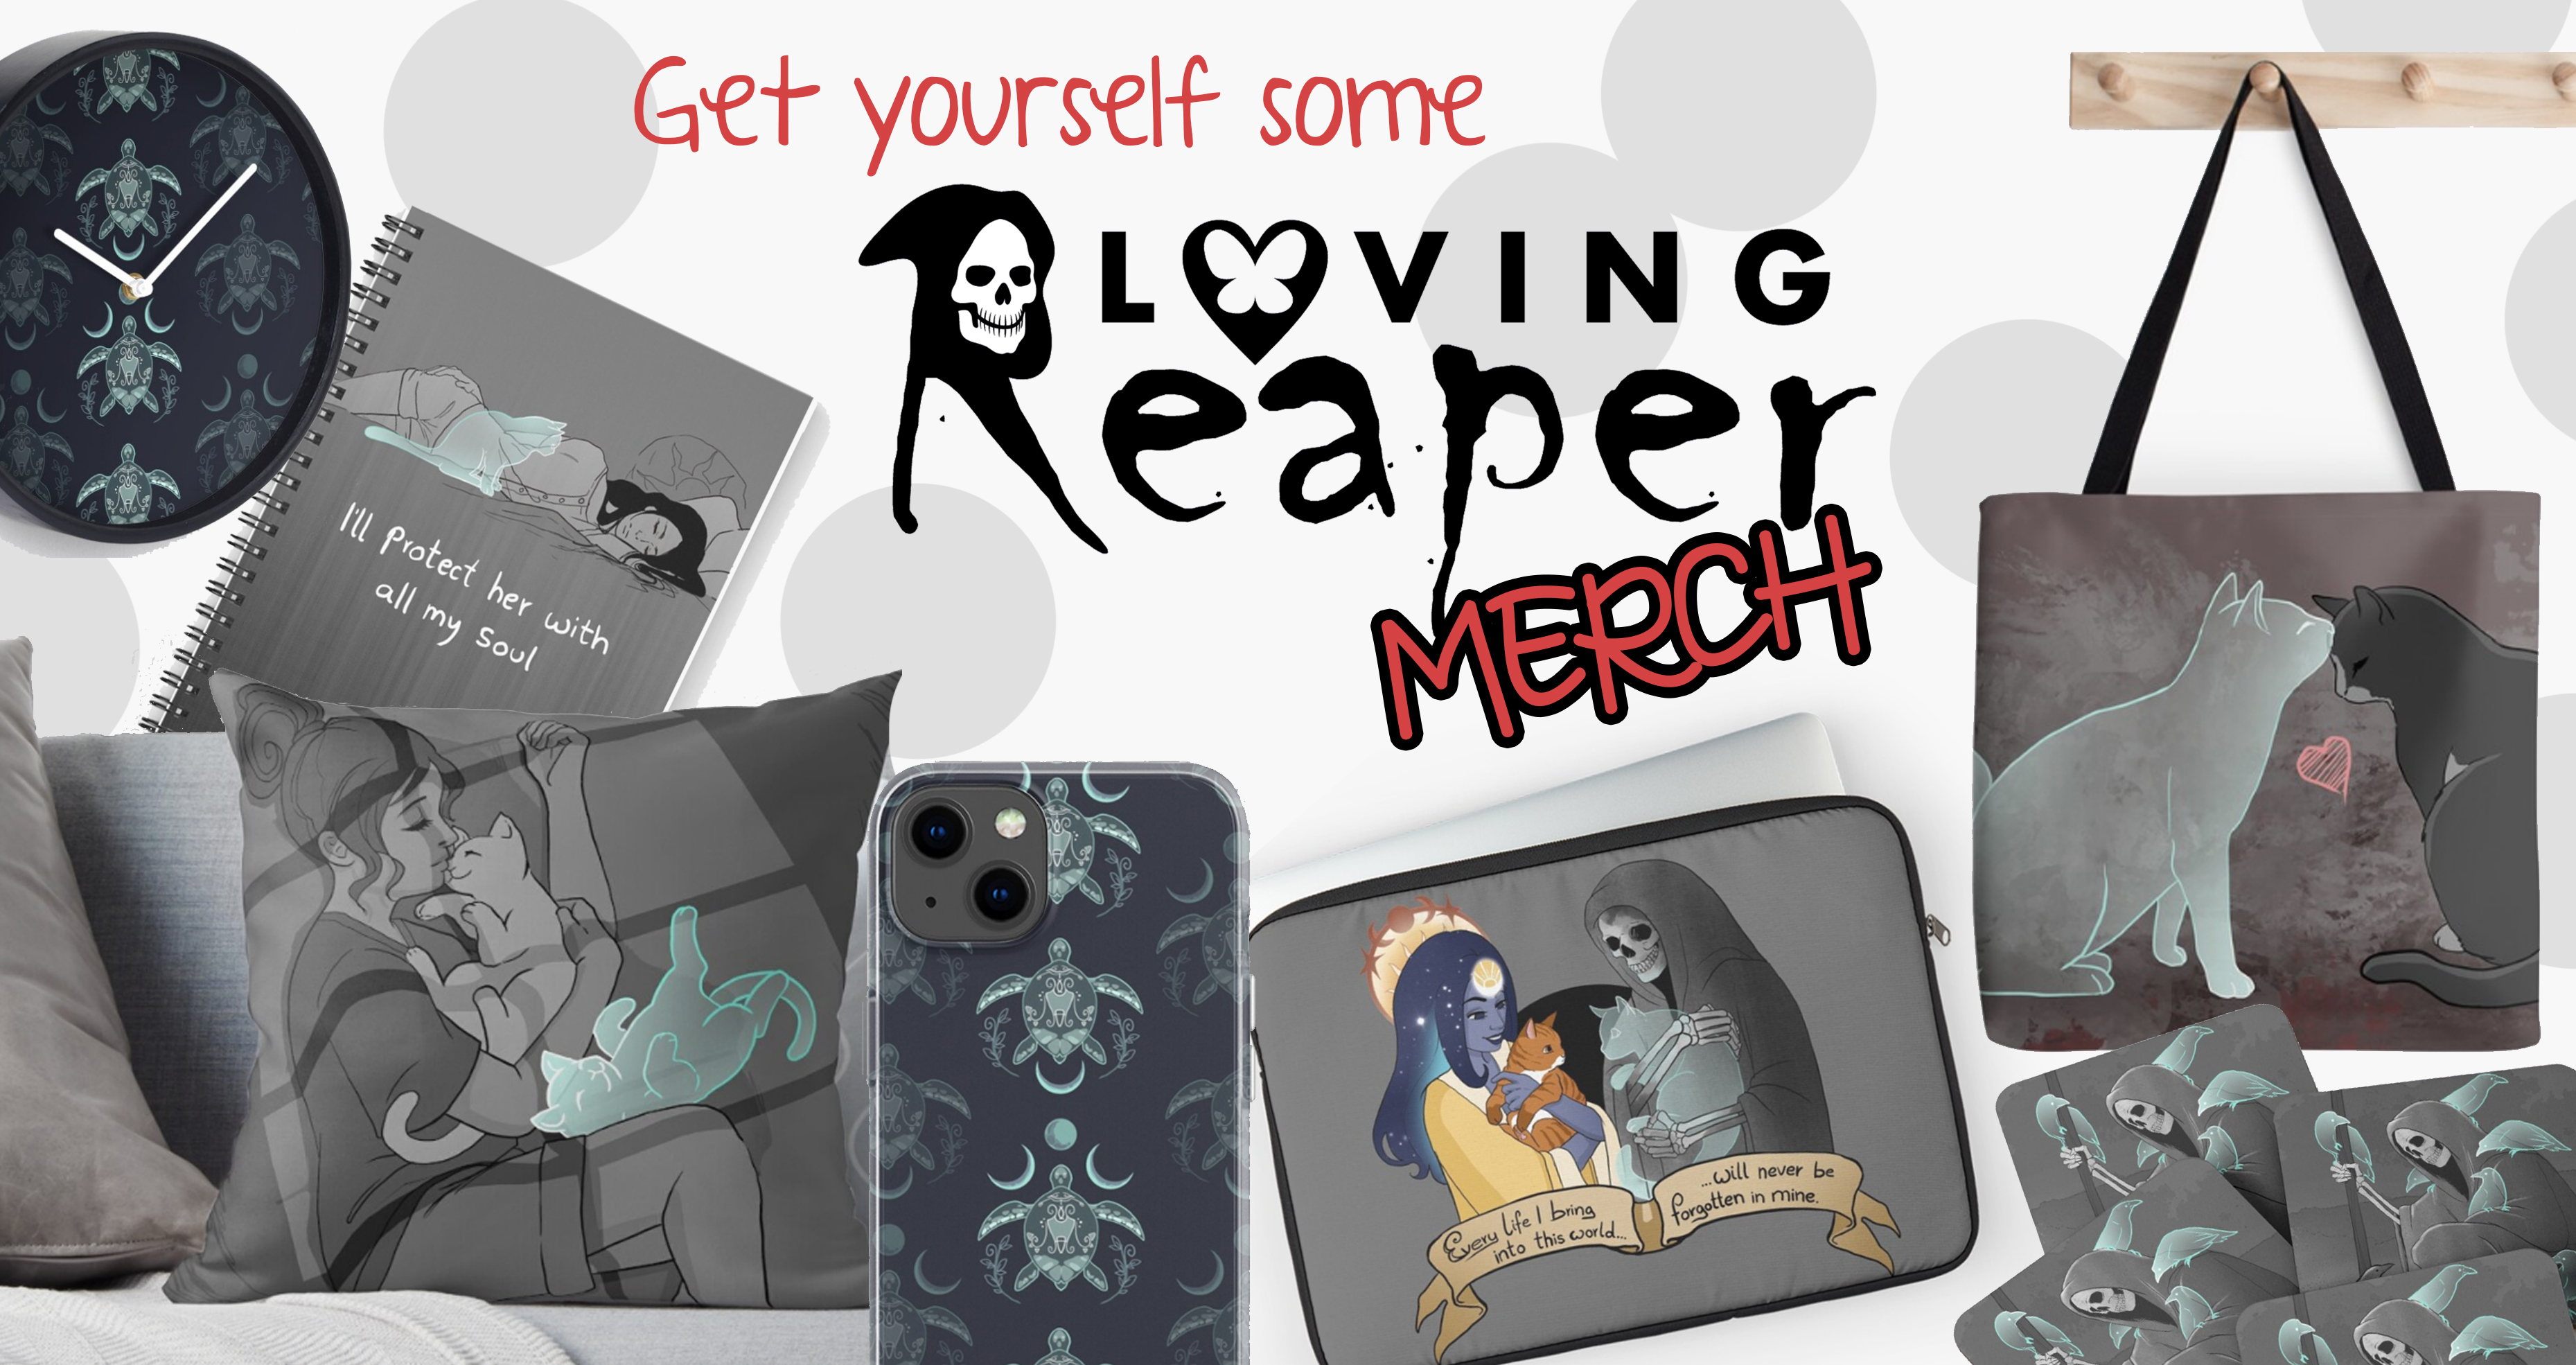 Get yourself some Loving Reaper Merch